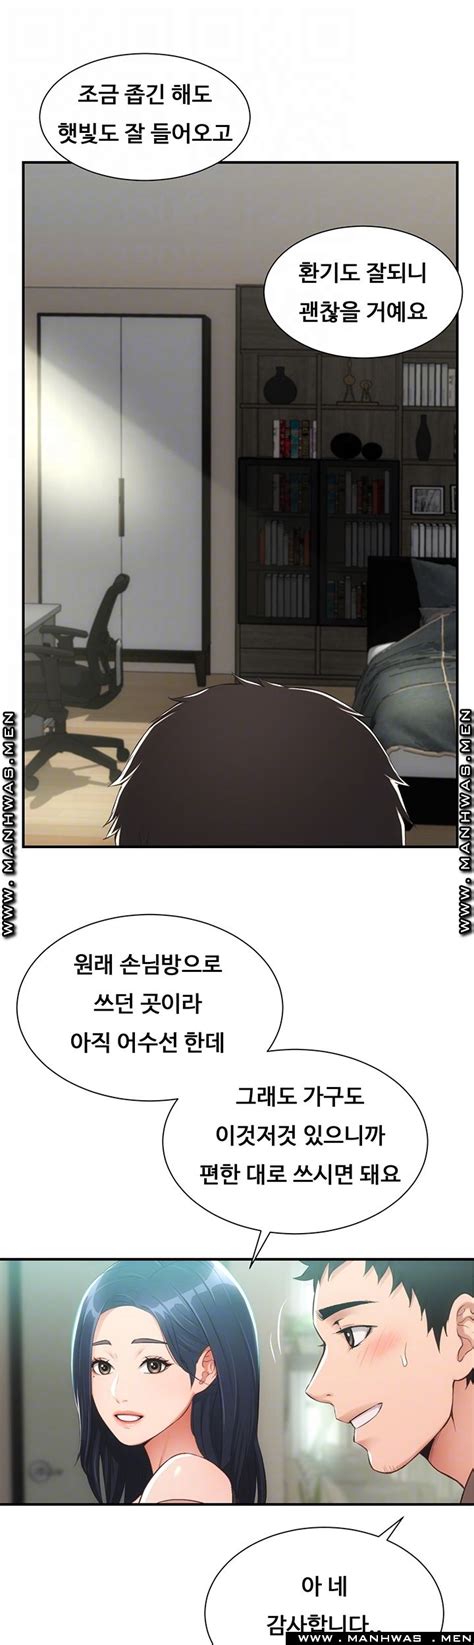 You are reading brother's wife dignity chapter 1 online at manhuascan. Brothers Wife Dignity Raw Manhwa Chapter 9 - Manhwa18 CC